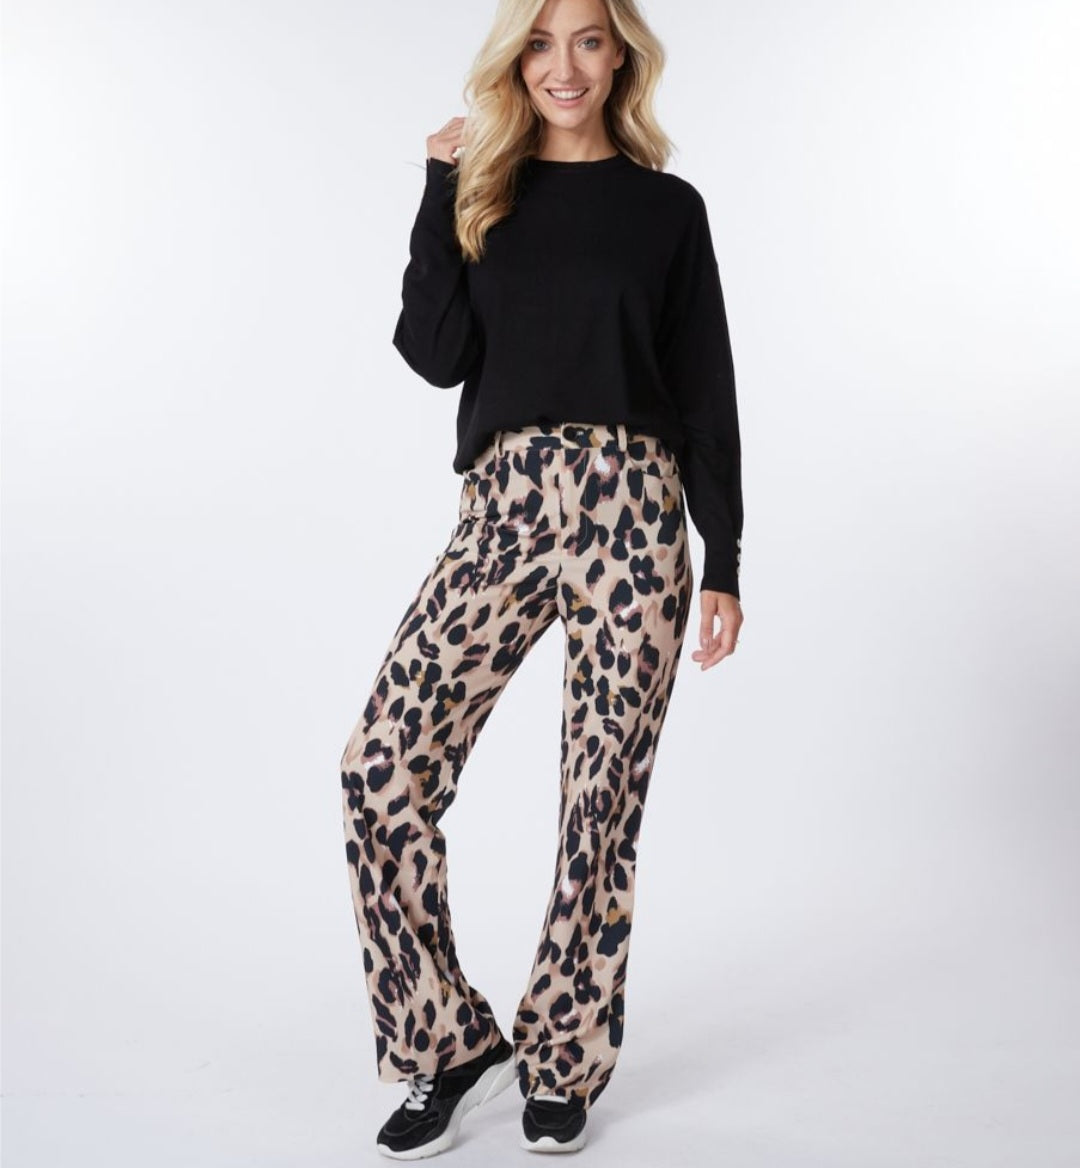 Riona Trousers WERE 107 NOW 32.10